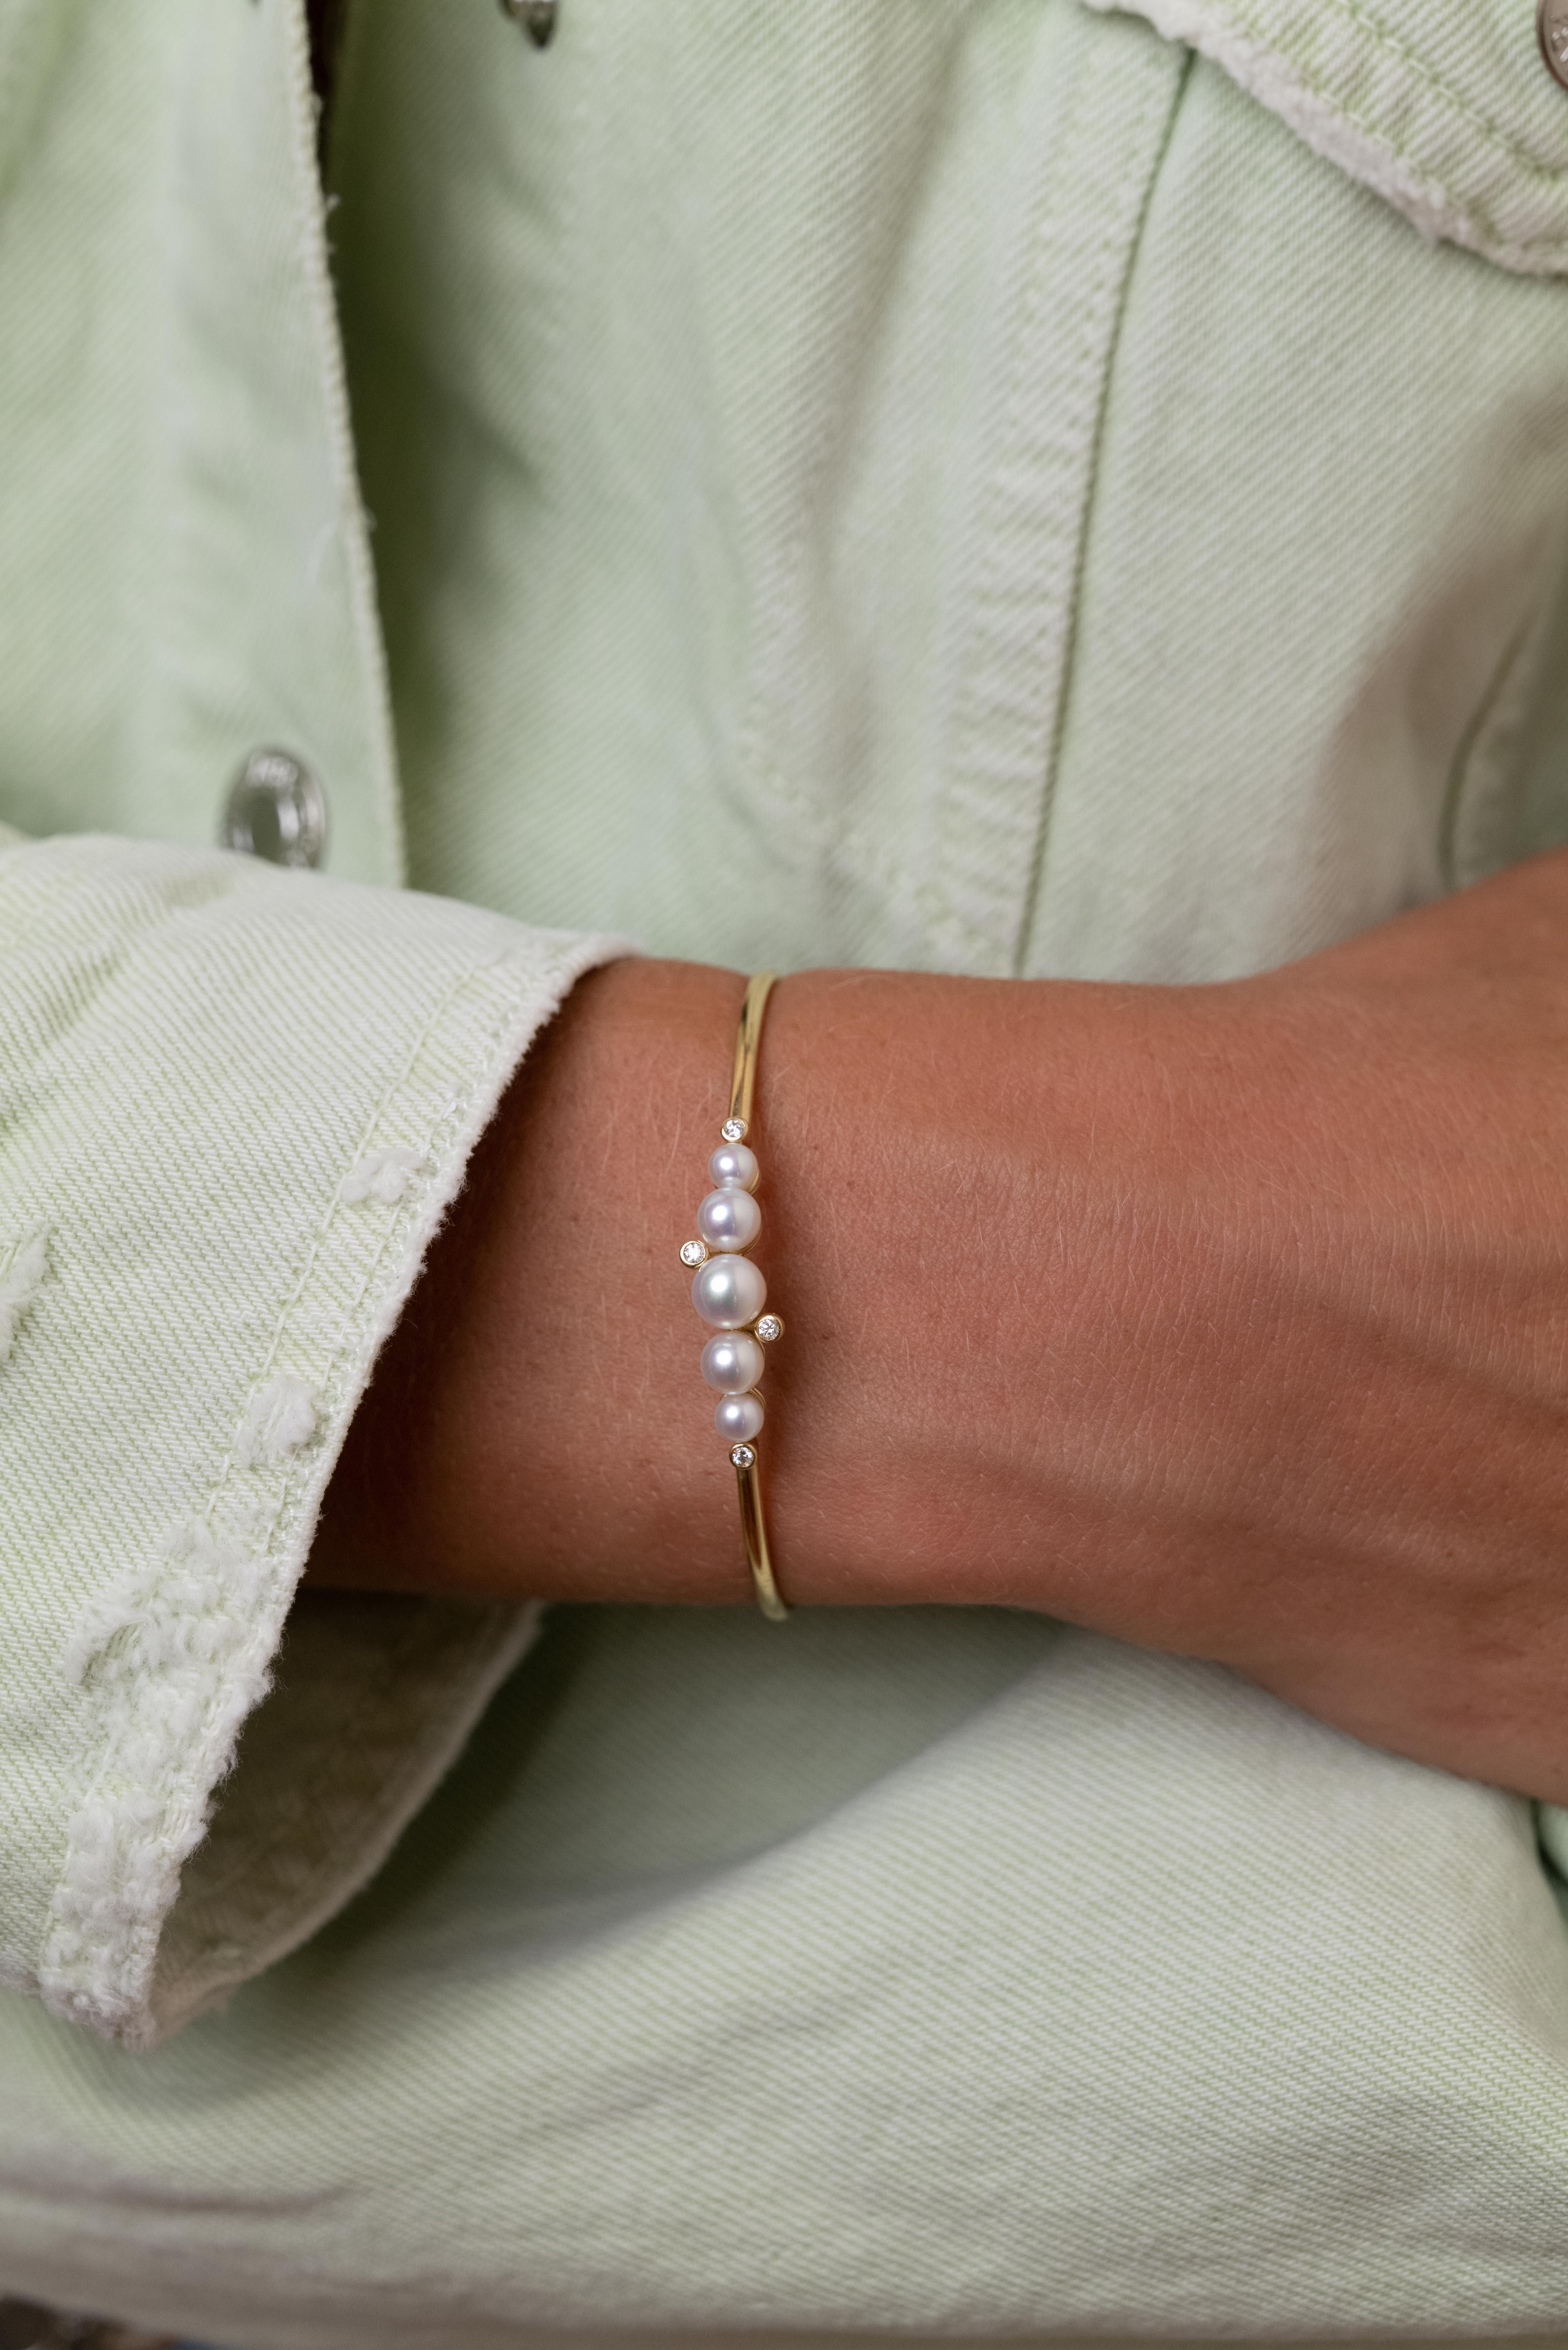 Drawing inspiration from the rising foam in the sea, this cuff slips easily on the wrist and features lustrous freshwater pearls and glimmering diamonds.
Circumference: 16cm / 6.2in
Width of Opening: 1.5cm / 0.6in
18 Karat Yellow Gold
Natural